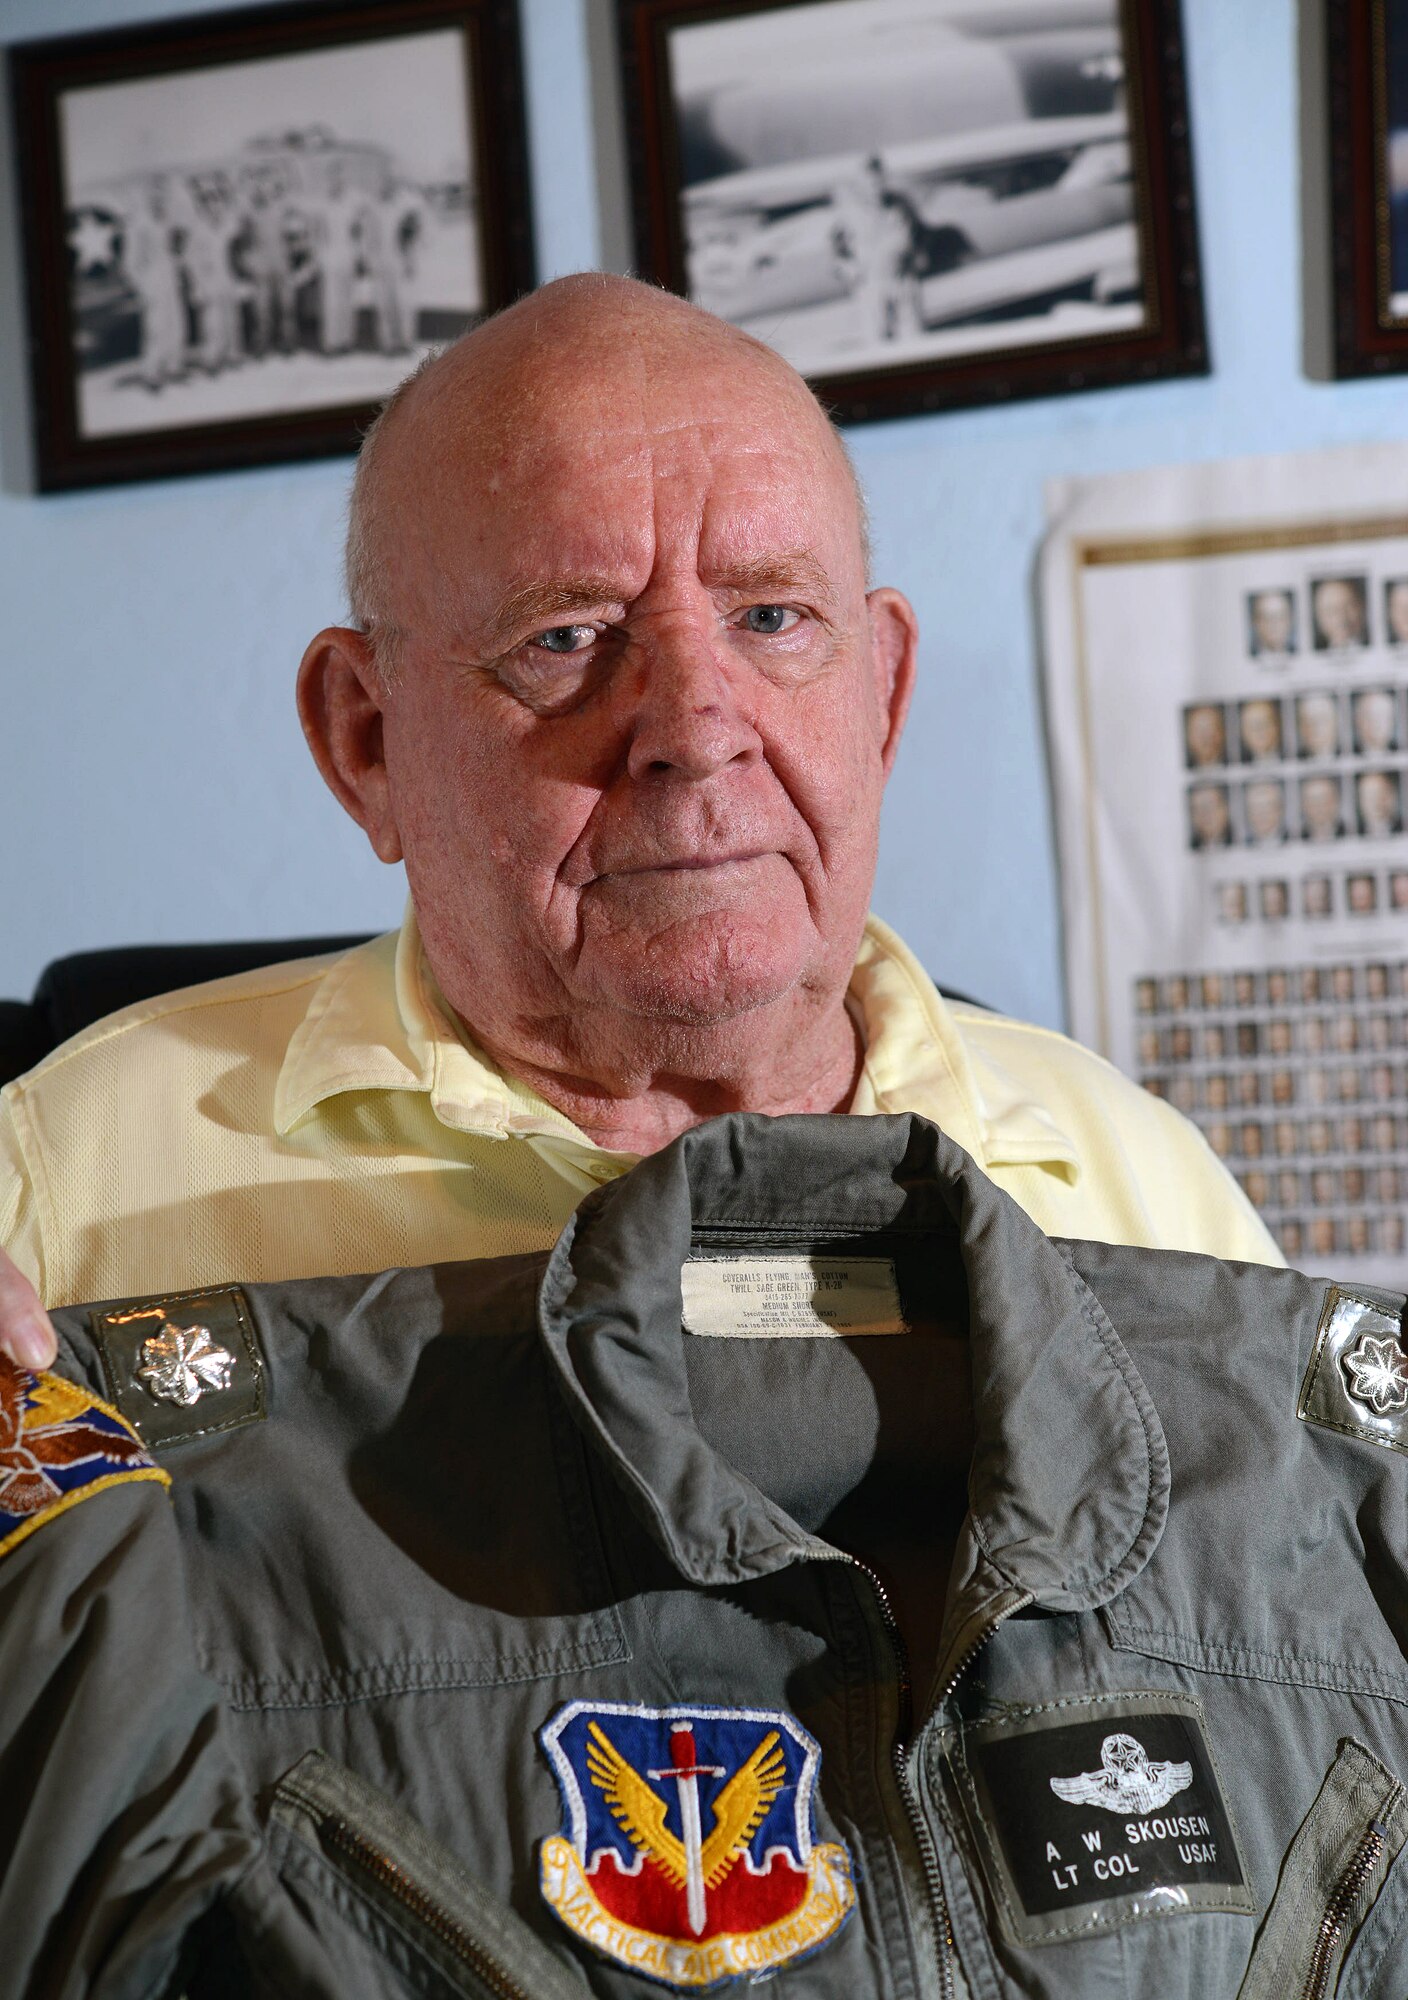 Retired Lt. Col. Alma Skousen shows off his flight suit October 30, 2015, in his Mesa, Ariz., home. Skousen flew combat missions in the Korean and Vietnam wars, was awarded the Distinguished Flying Cross for acts of heroism and extraordinary achievement while participating in an aerial flight. Skousen ended his flying career with more than 6,000 flying hours. (U.S. Air Force photo by Tech. Sgt. Timothy Boyer)